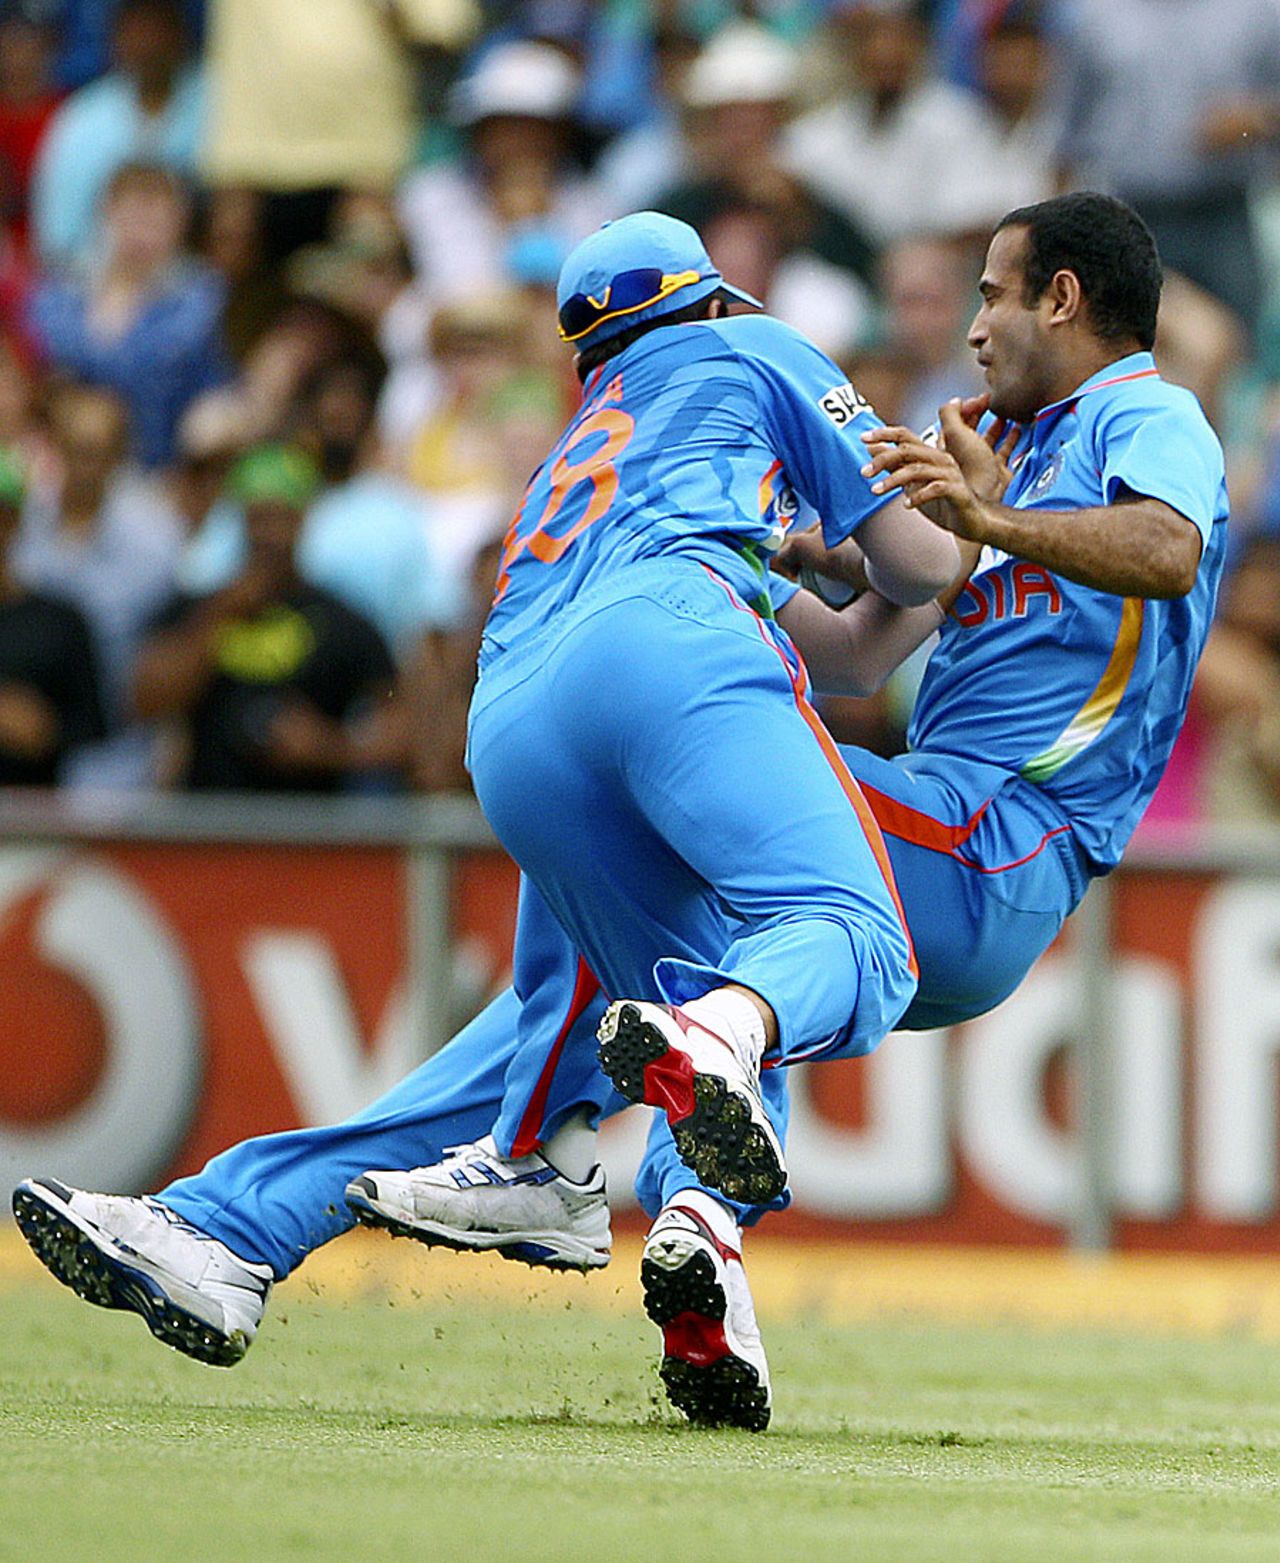 Suresh Raina collides with Irfan Pathan in the process of catching David Warner, Australia v India, CB Series, Sydney, February 26, 2012